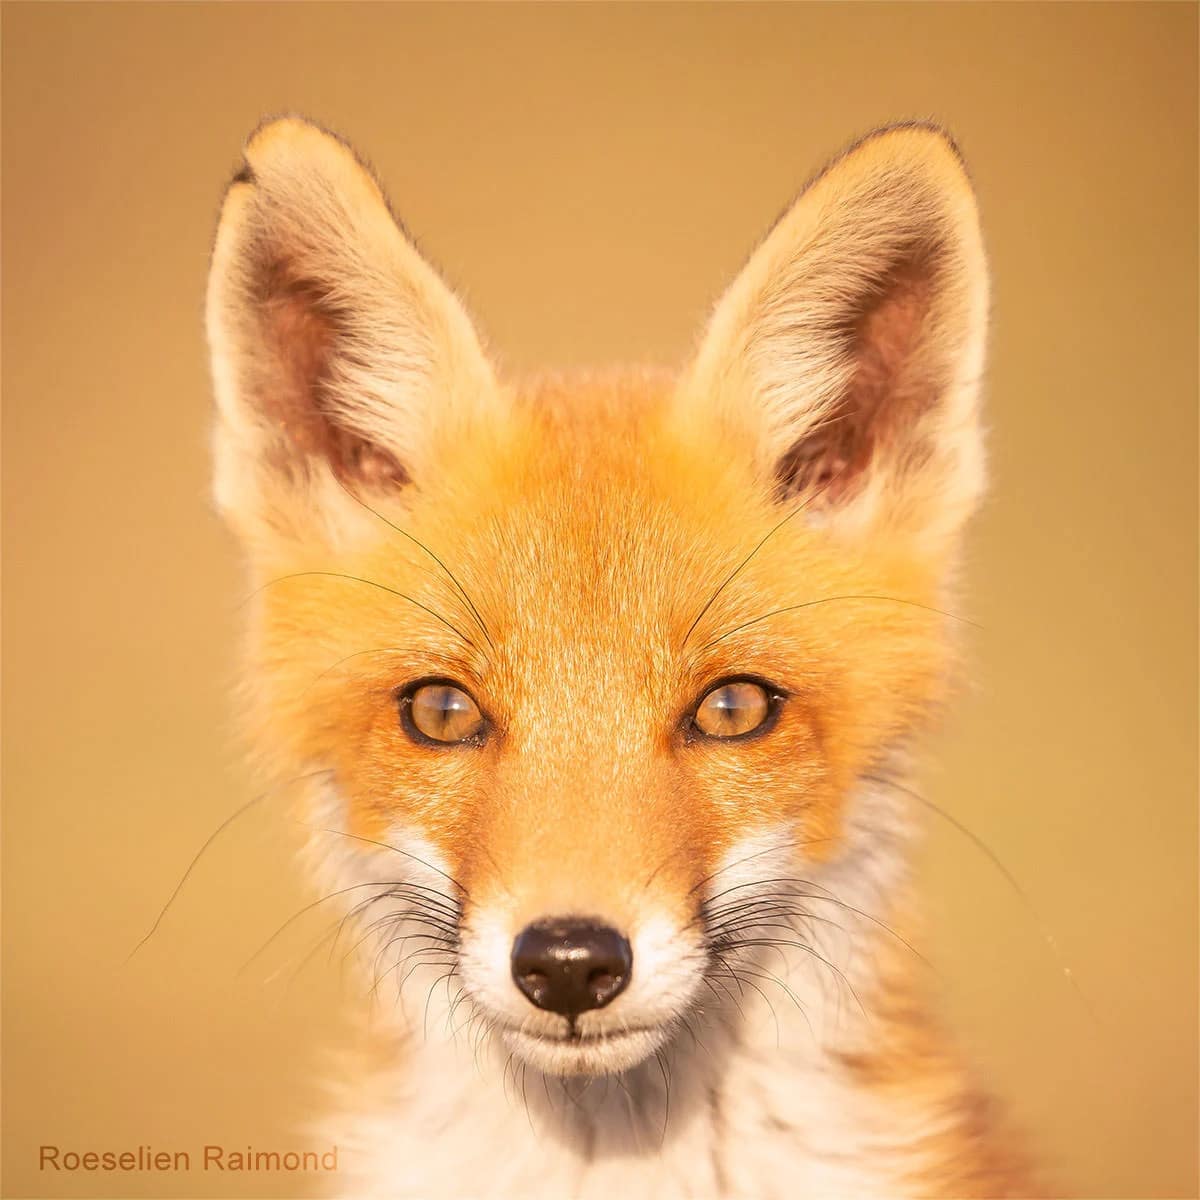 Wild Animal Photography by Roeselien Raimond